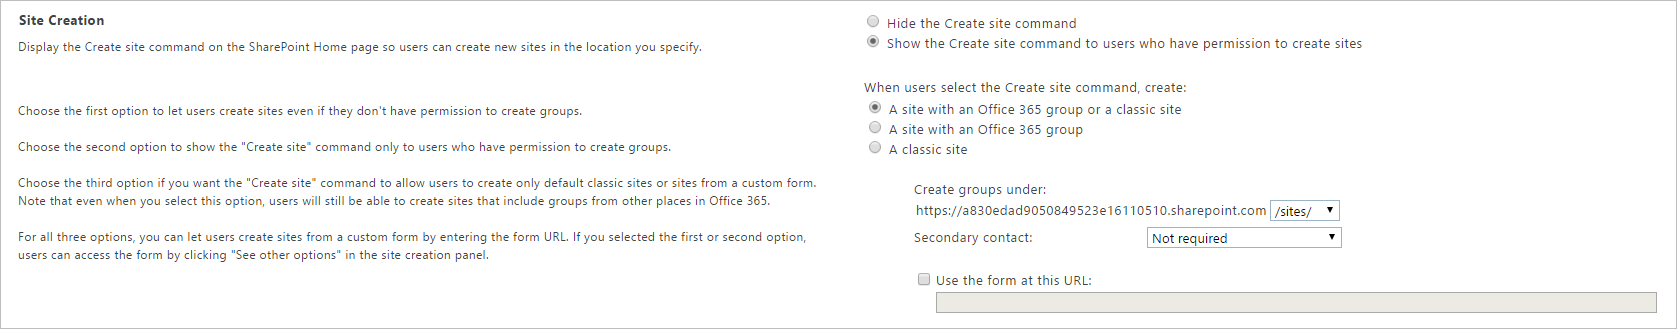 create-connected-sharepoint-online-team-sites-in-seconds-3